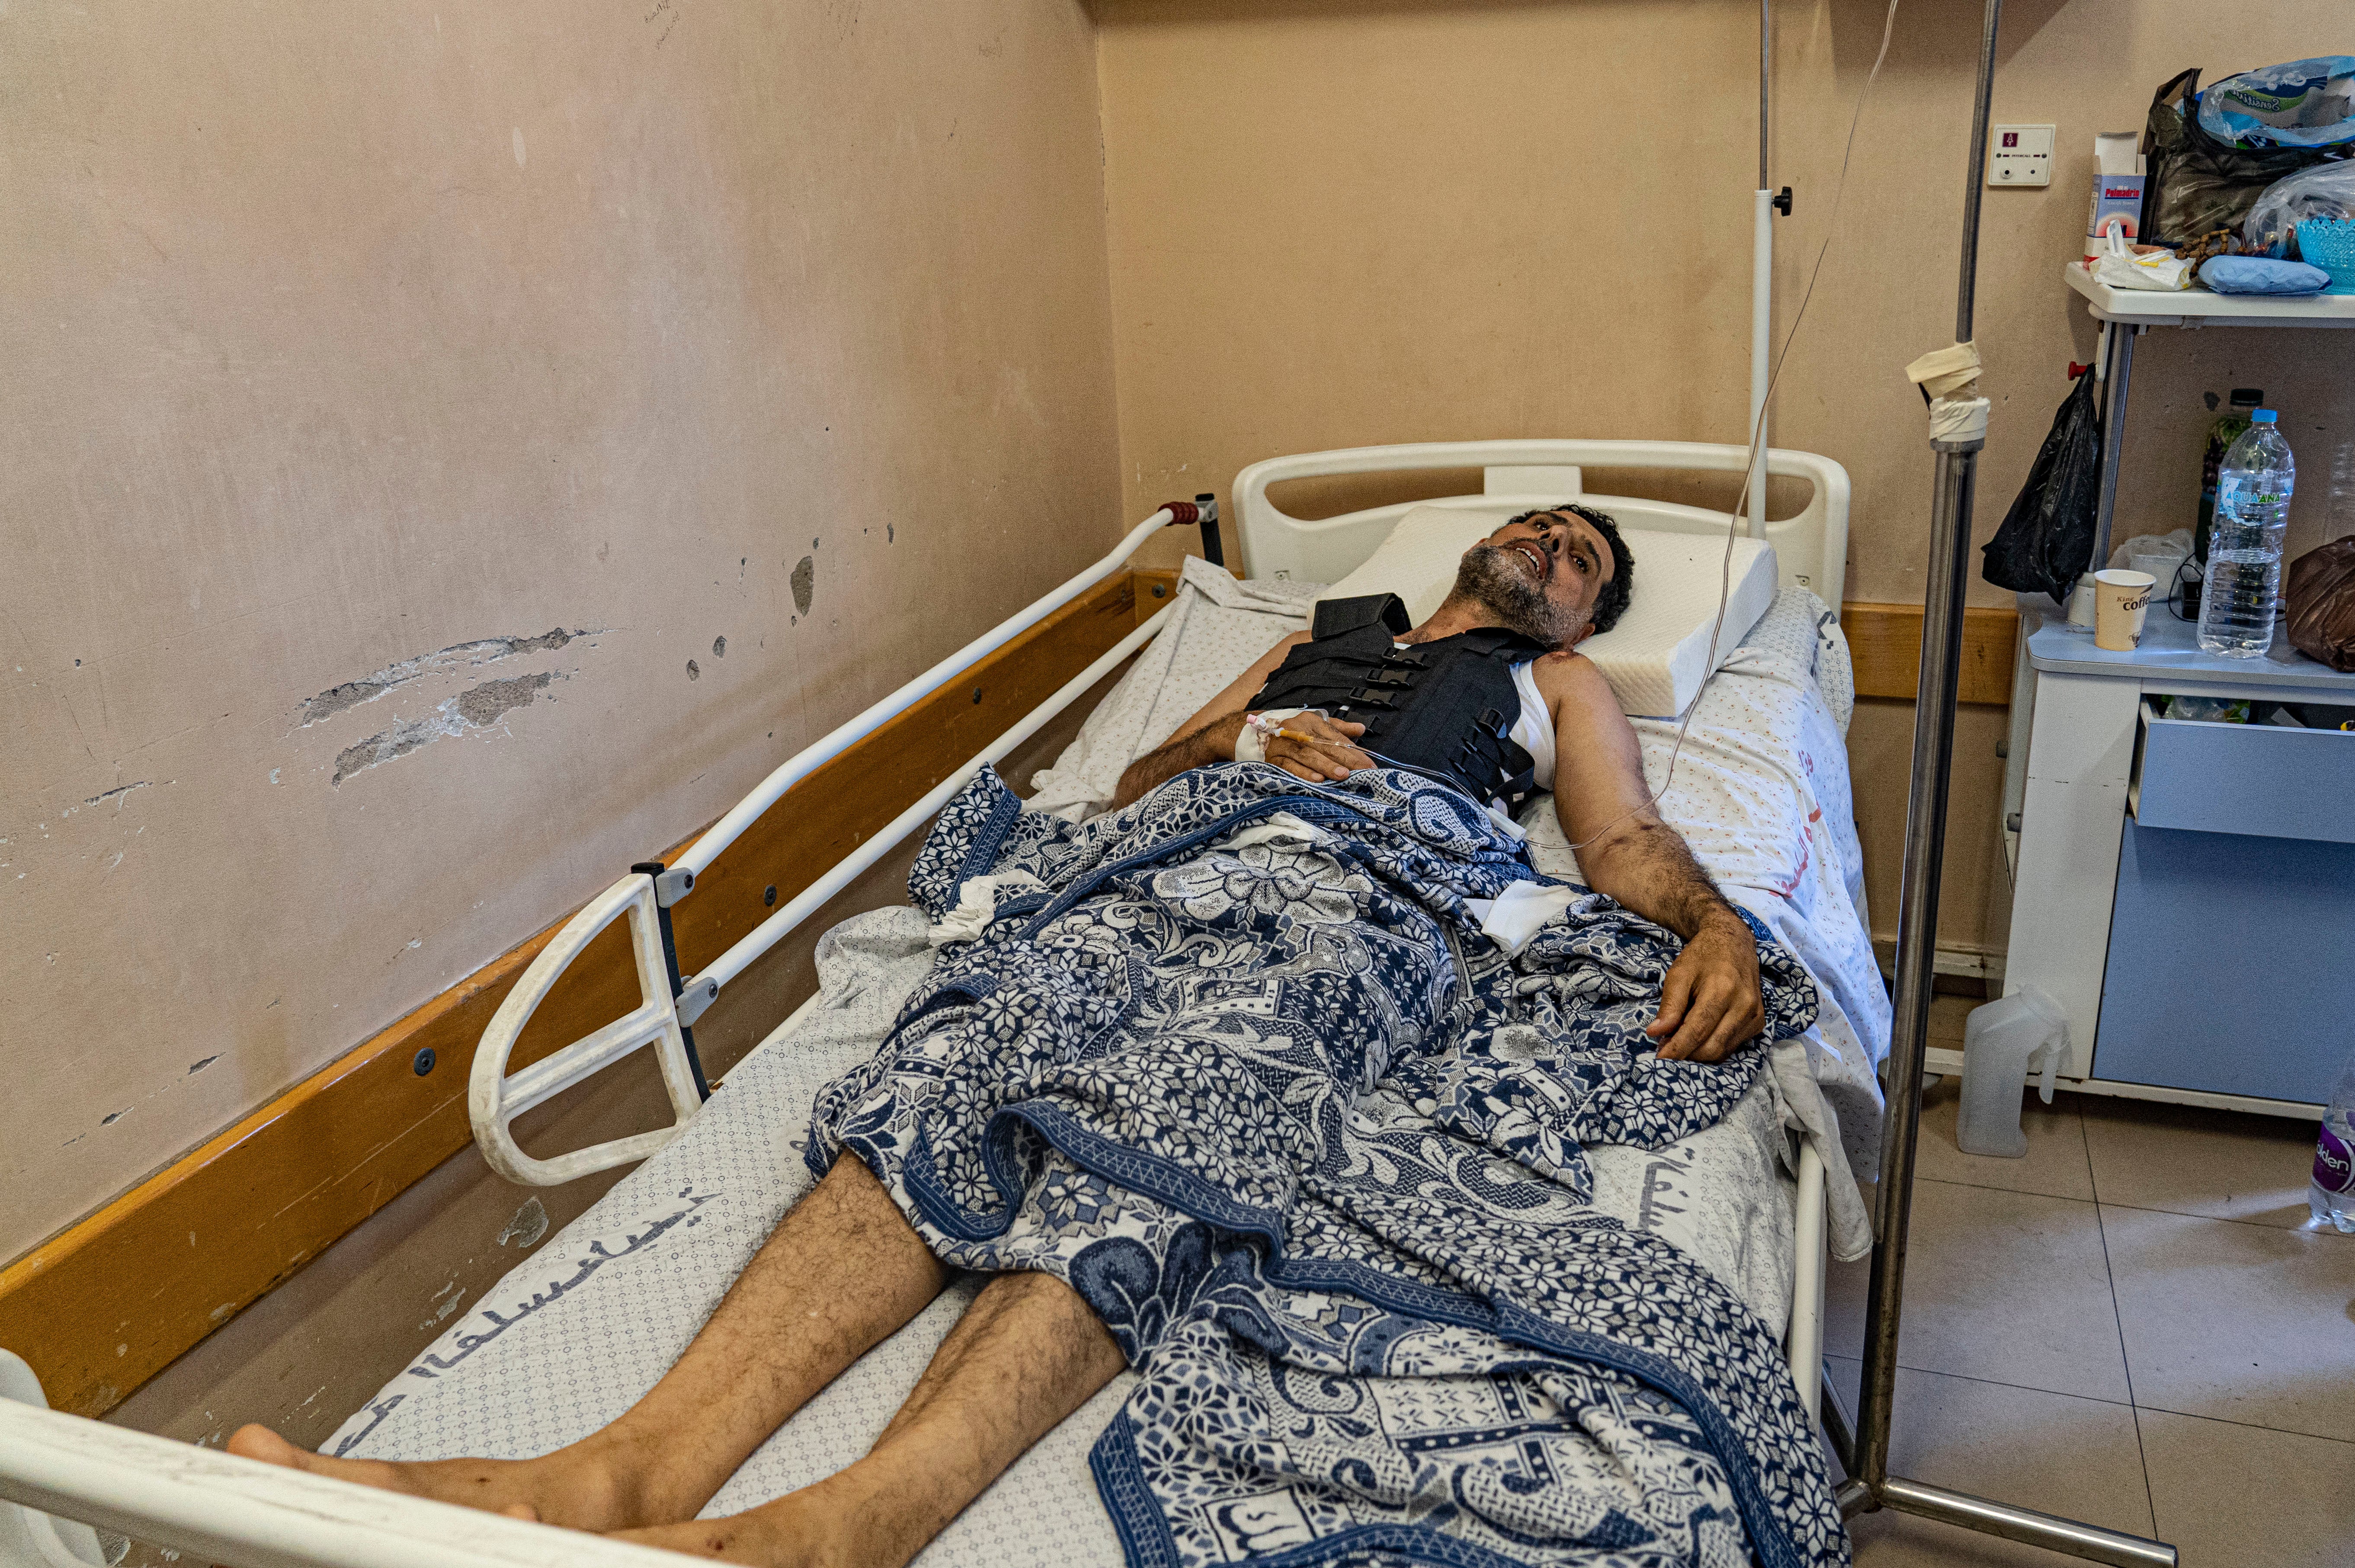 Shoukri Kollaq, who lost three children and his wife in the bombing, recovers in hospital